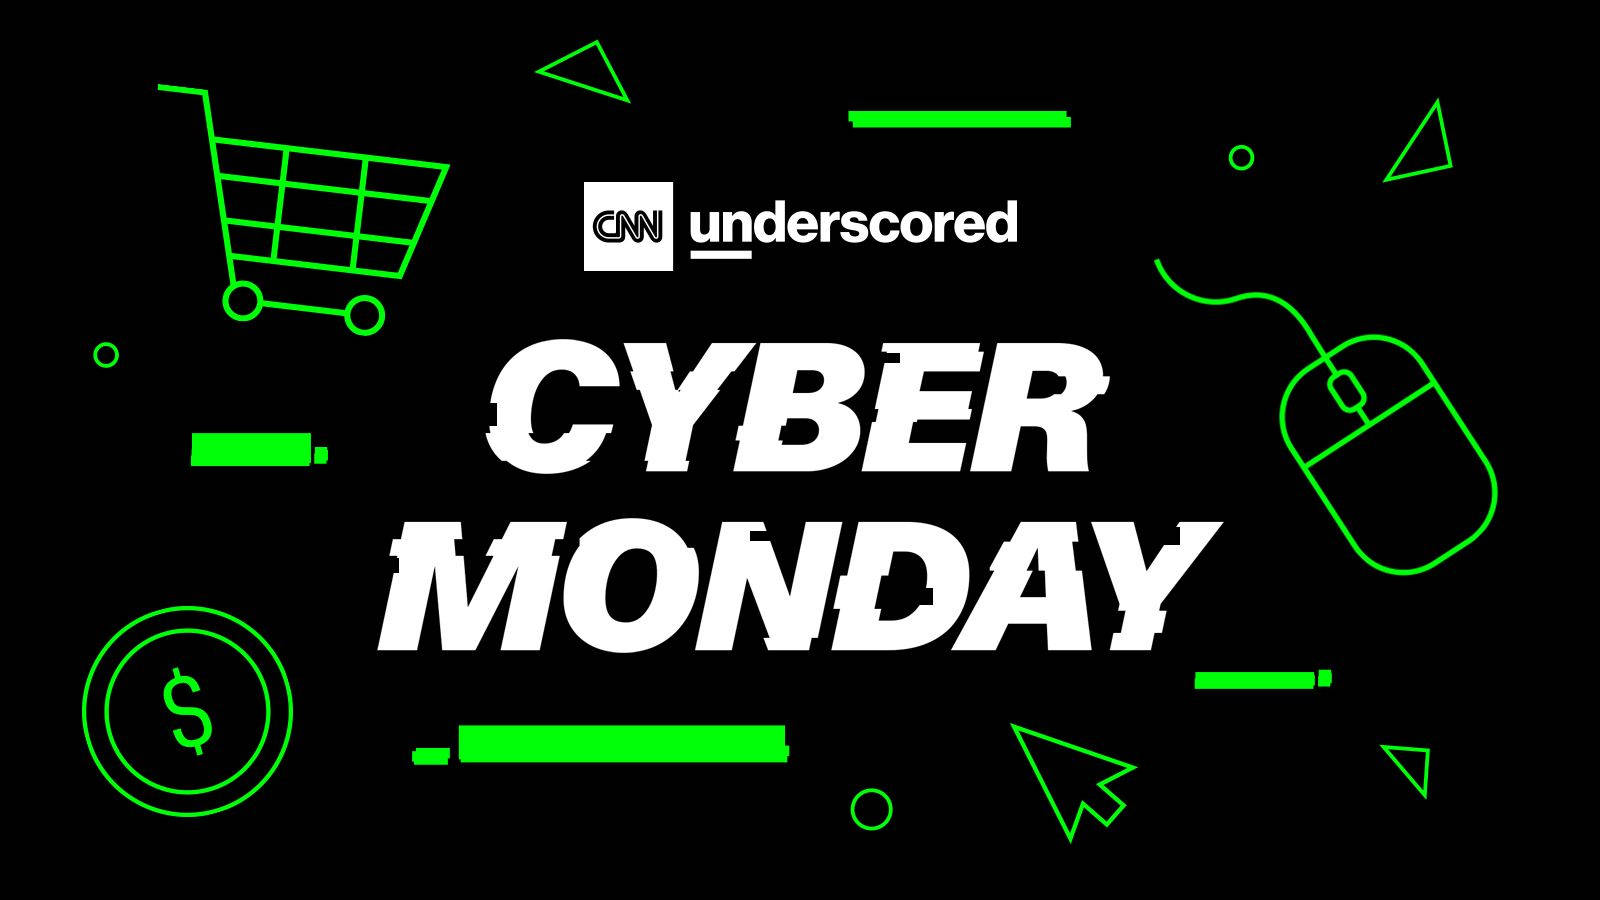 Cyber Monday Gadget And Shopping Carts